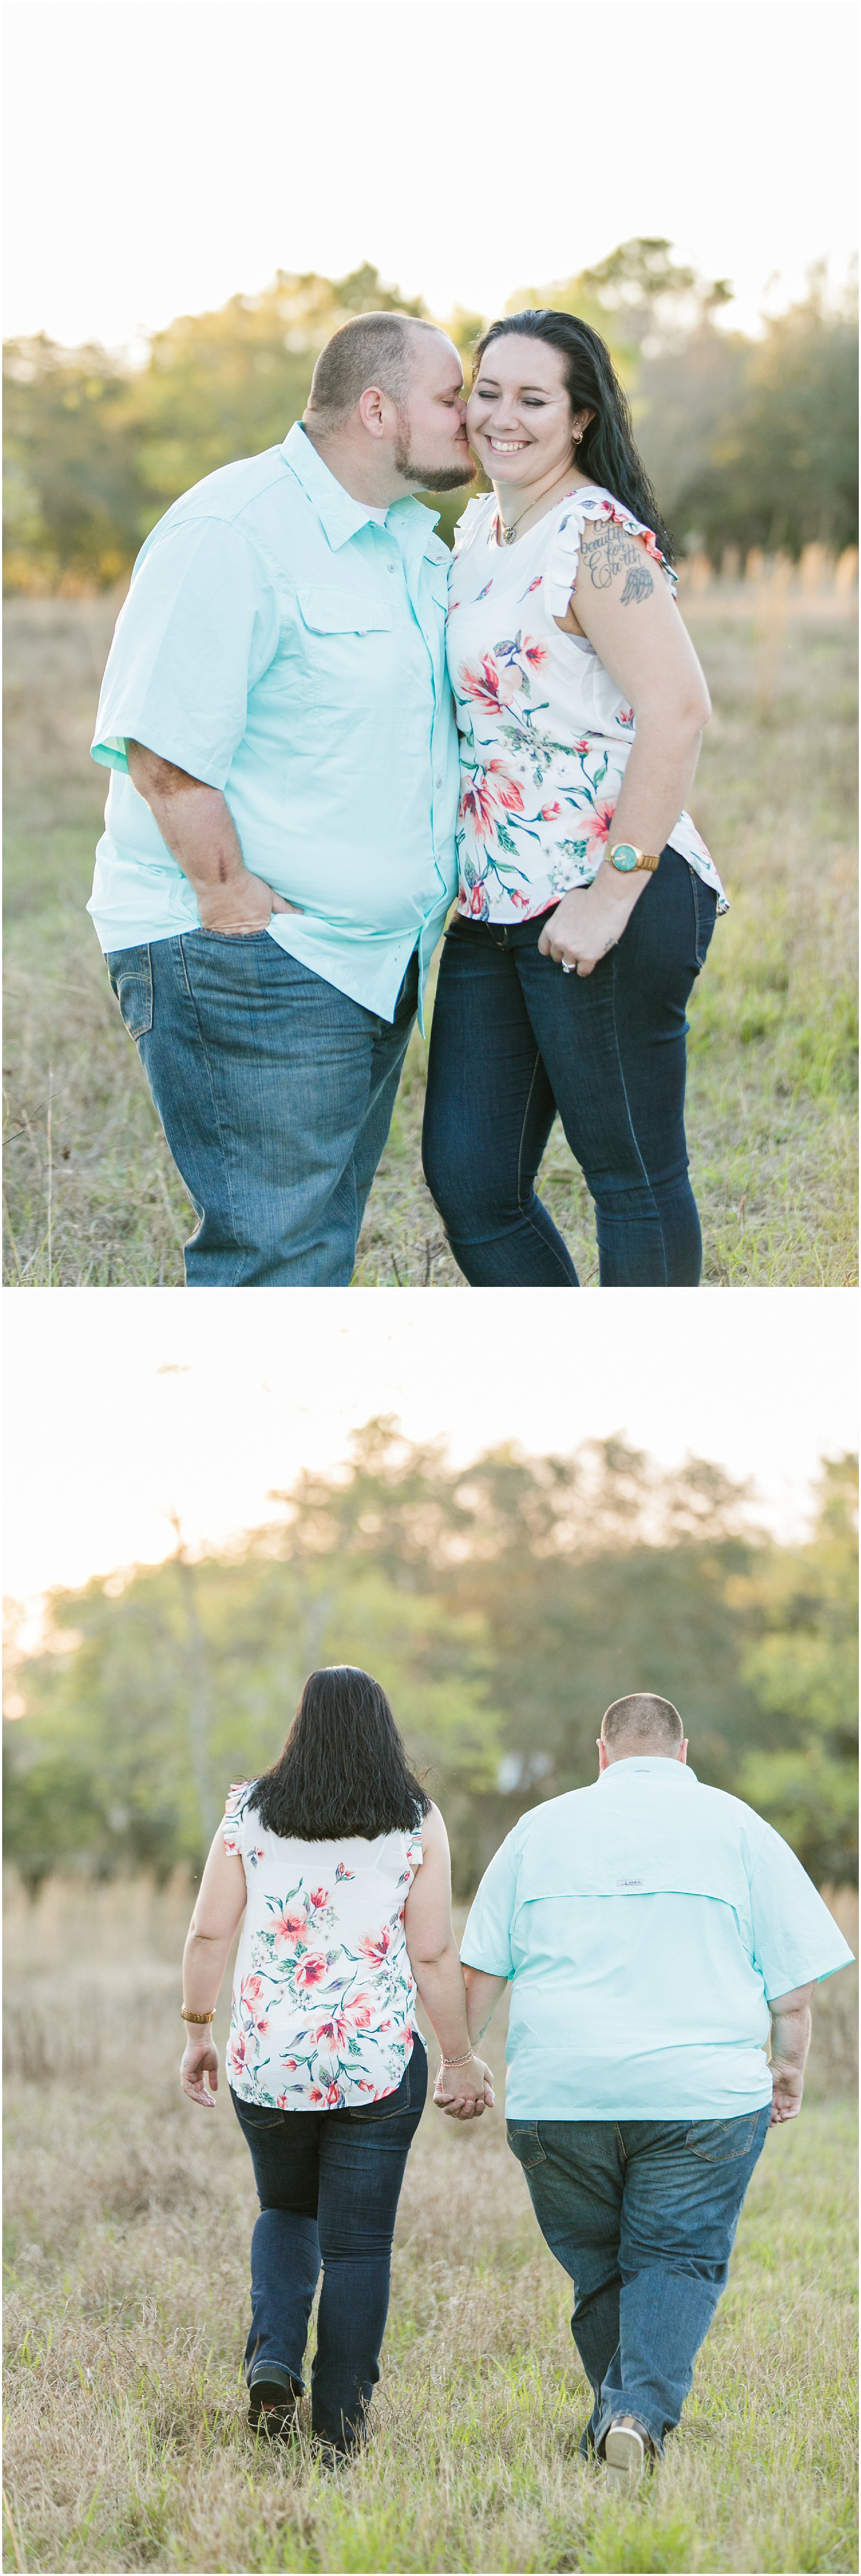 Engagement session couple snuggling and walking in a field.